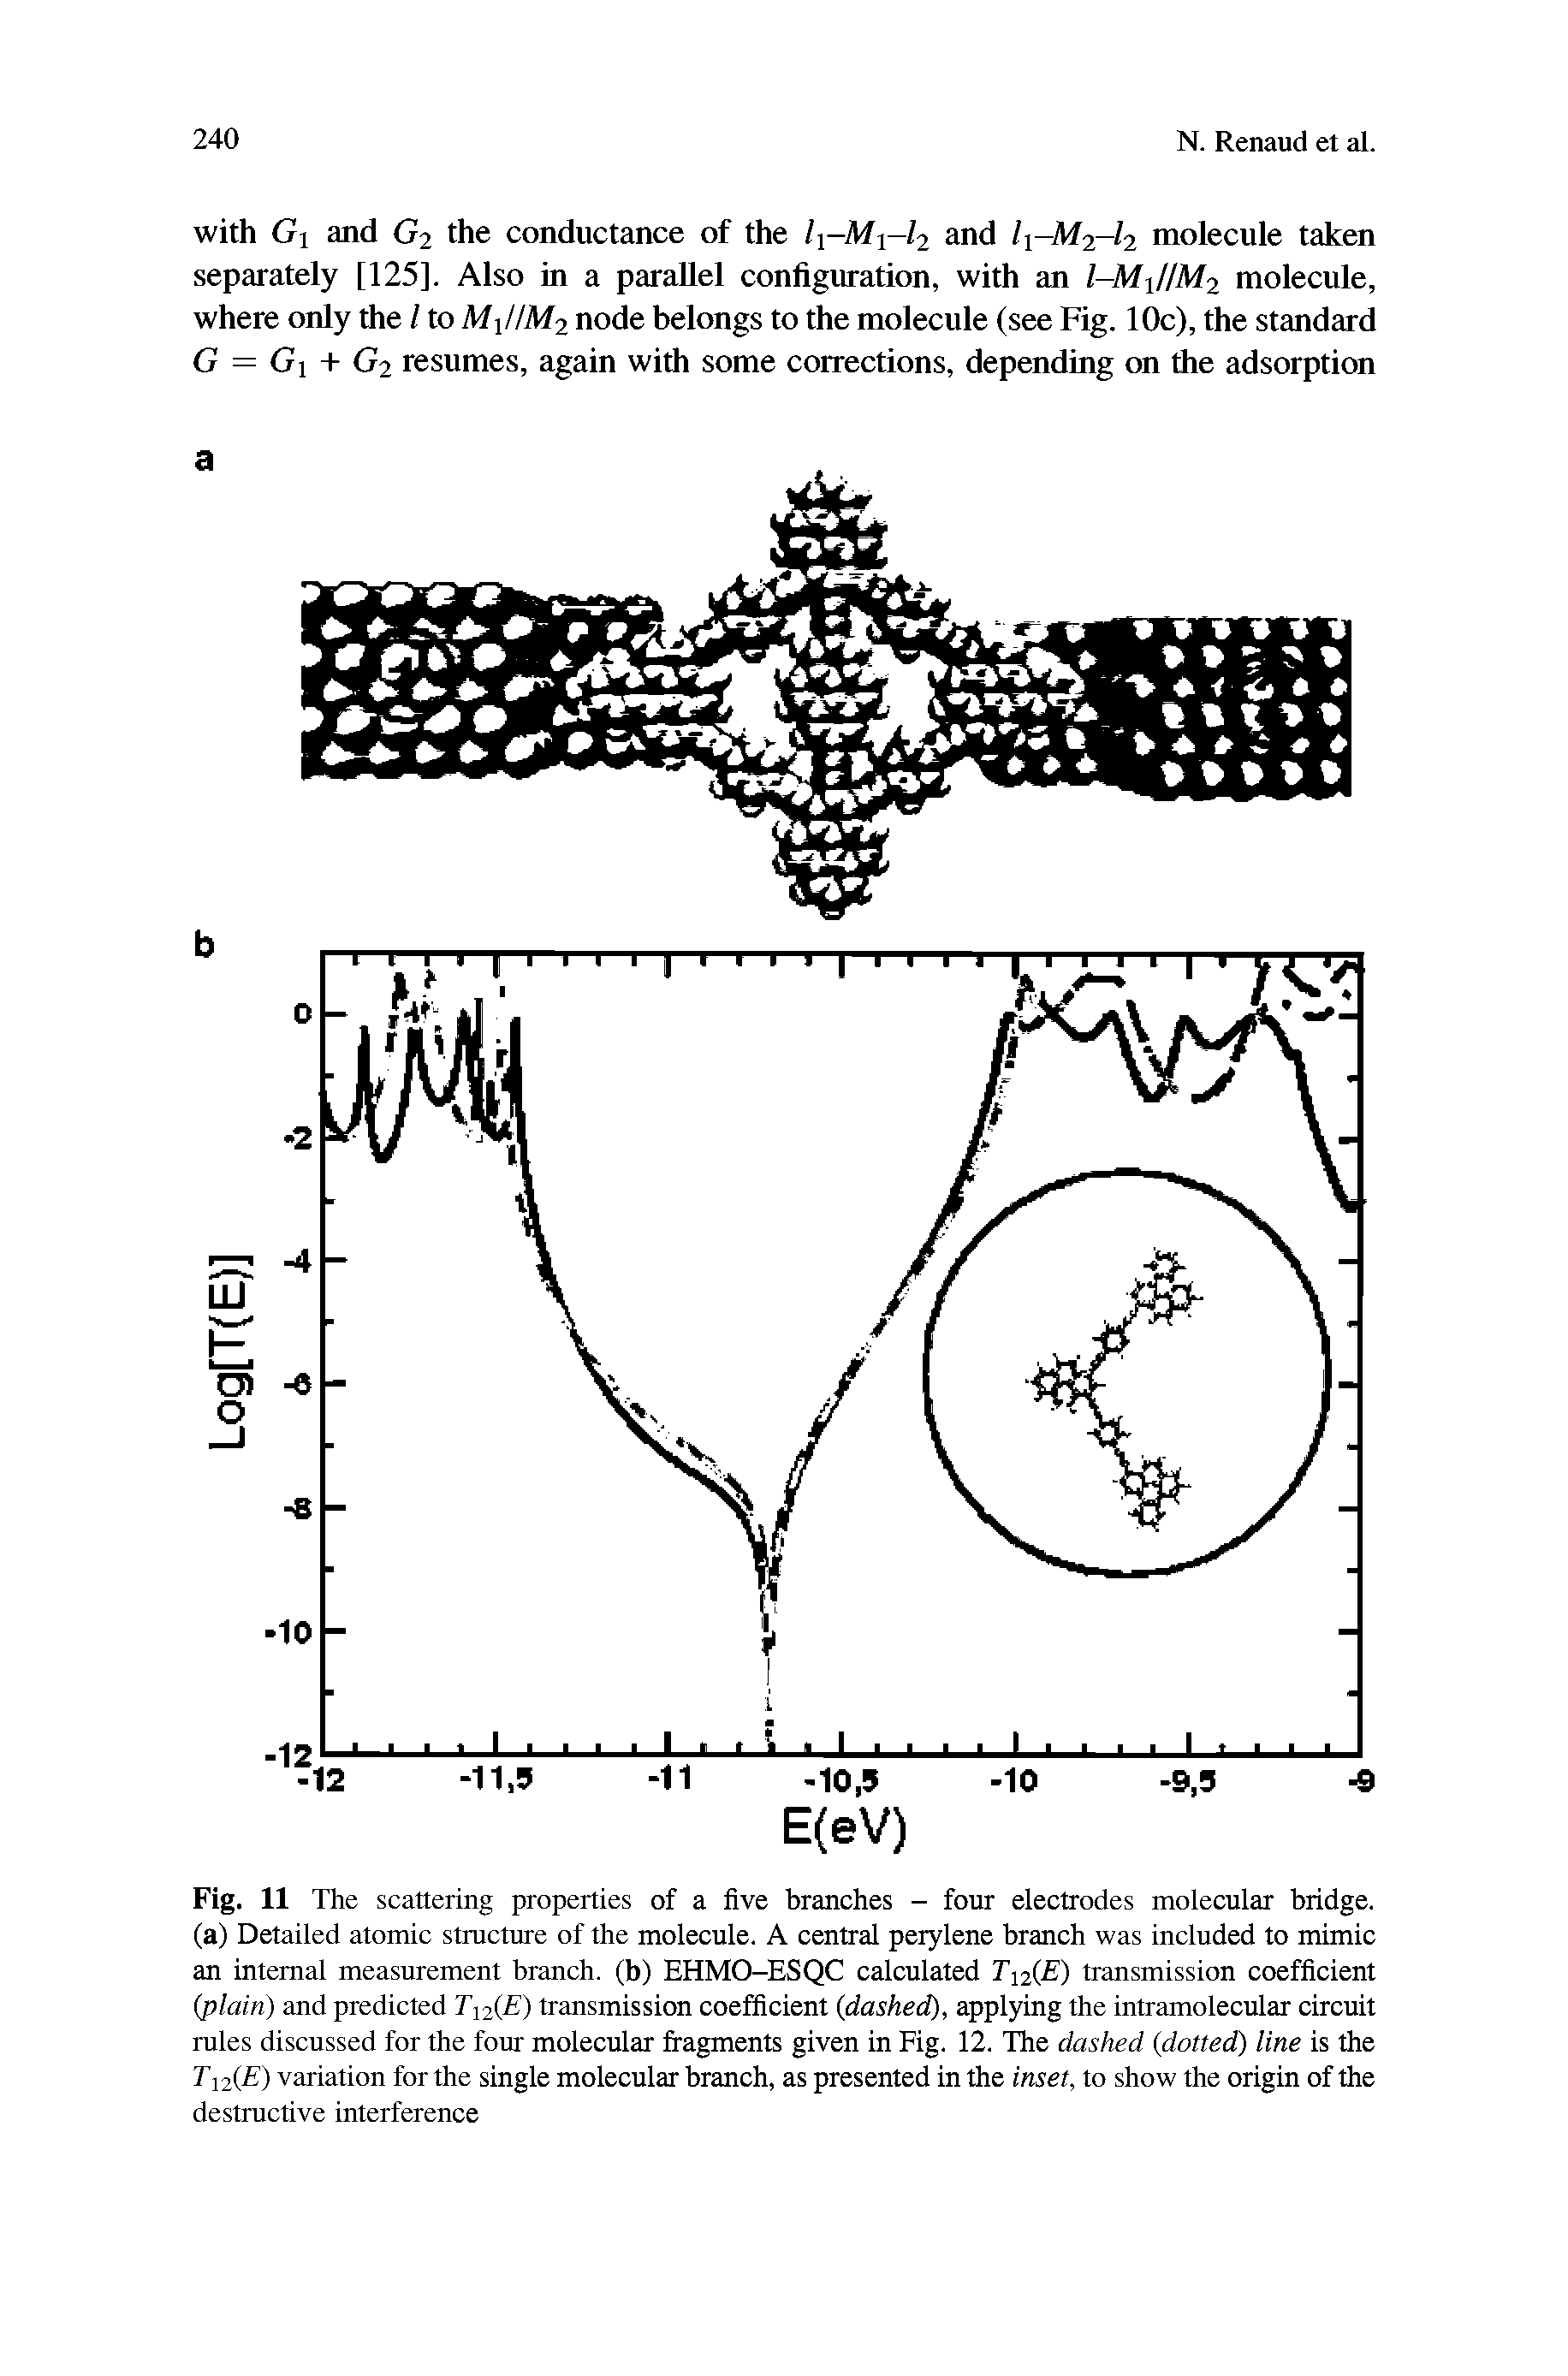 Fig. 11 The scattering properties of a five branches - four electrodes molecular bridge, (a) Detailed atomic structure of the molecule. A central perylene branch was included to mimic an internal measurement branch, (b) EHMO-ESQC calculated T12(E) transmission coefficient (plain) and predicted T12(E) transmission coefficient (dashed), applying the intramolecular circuit rules discussed for the four molecular fragments given in Fig. 12. The dashed (dotted) line is the Ti2(E) variation for the single molecular branch, as presented in the inset, to show the origin of the destructive interference...